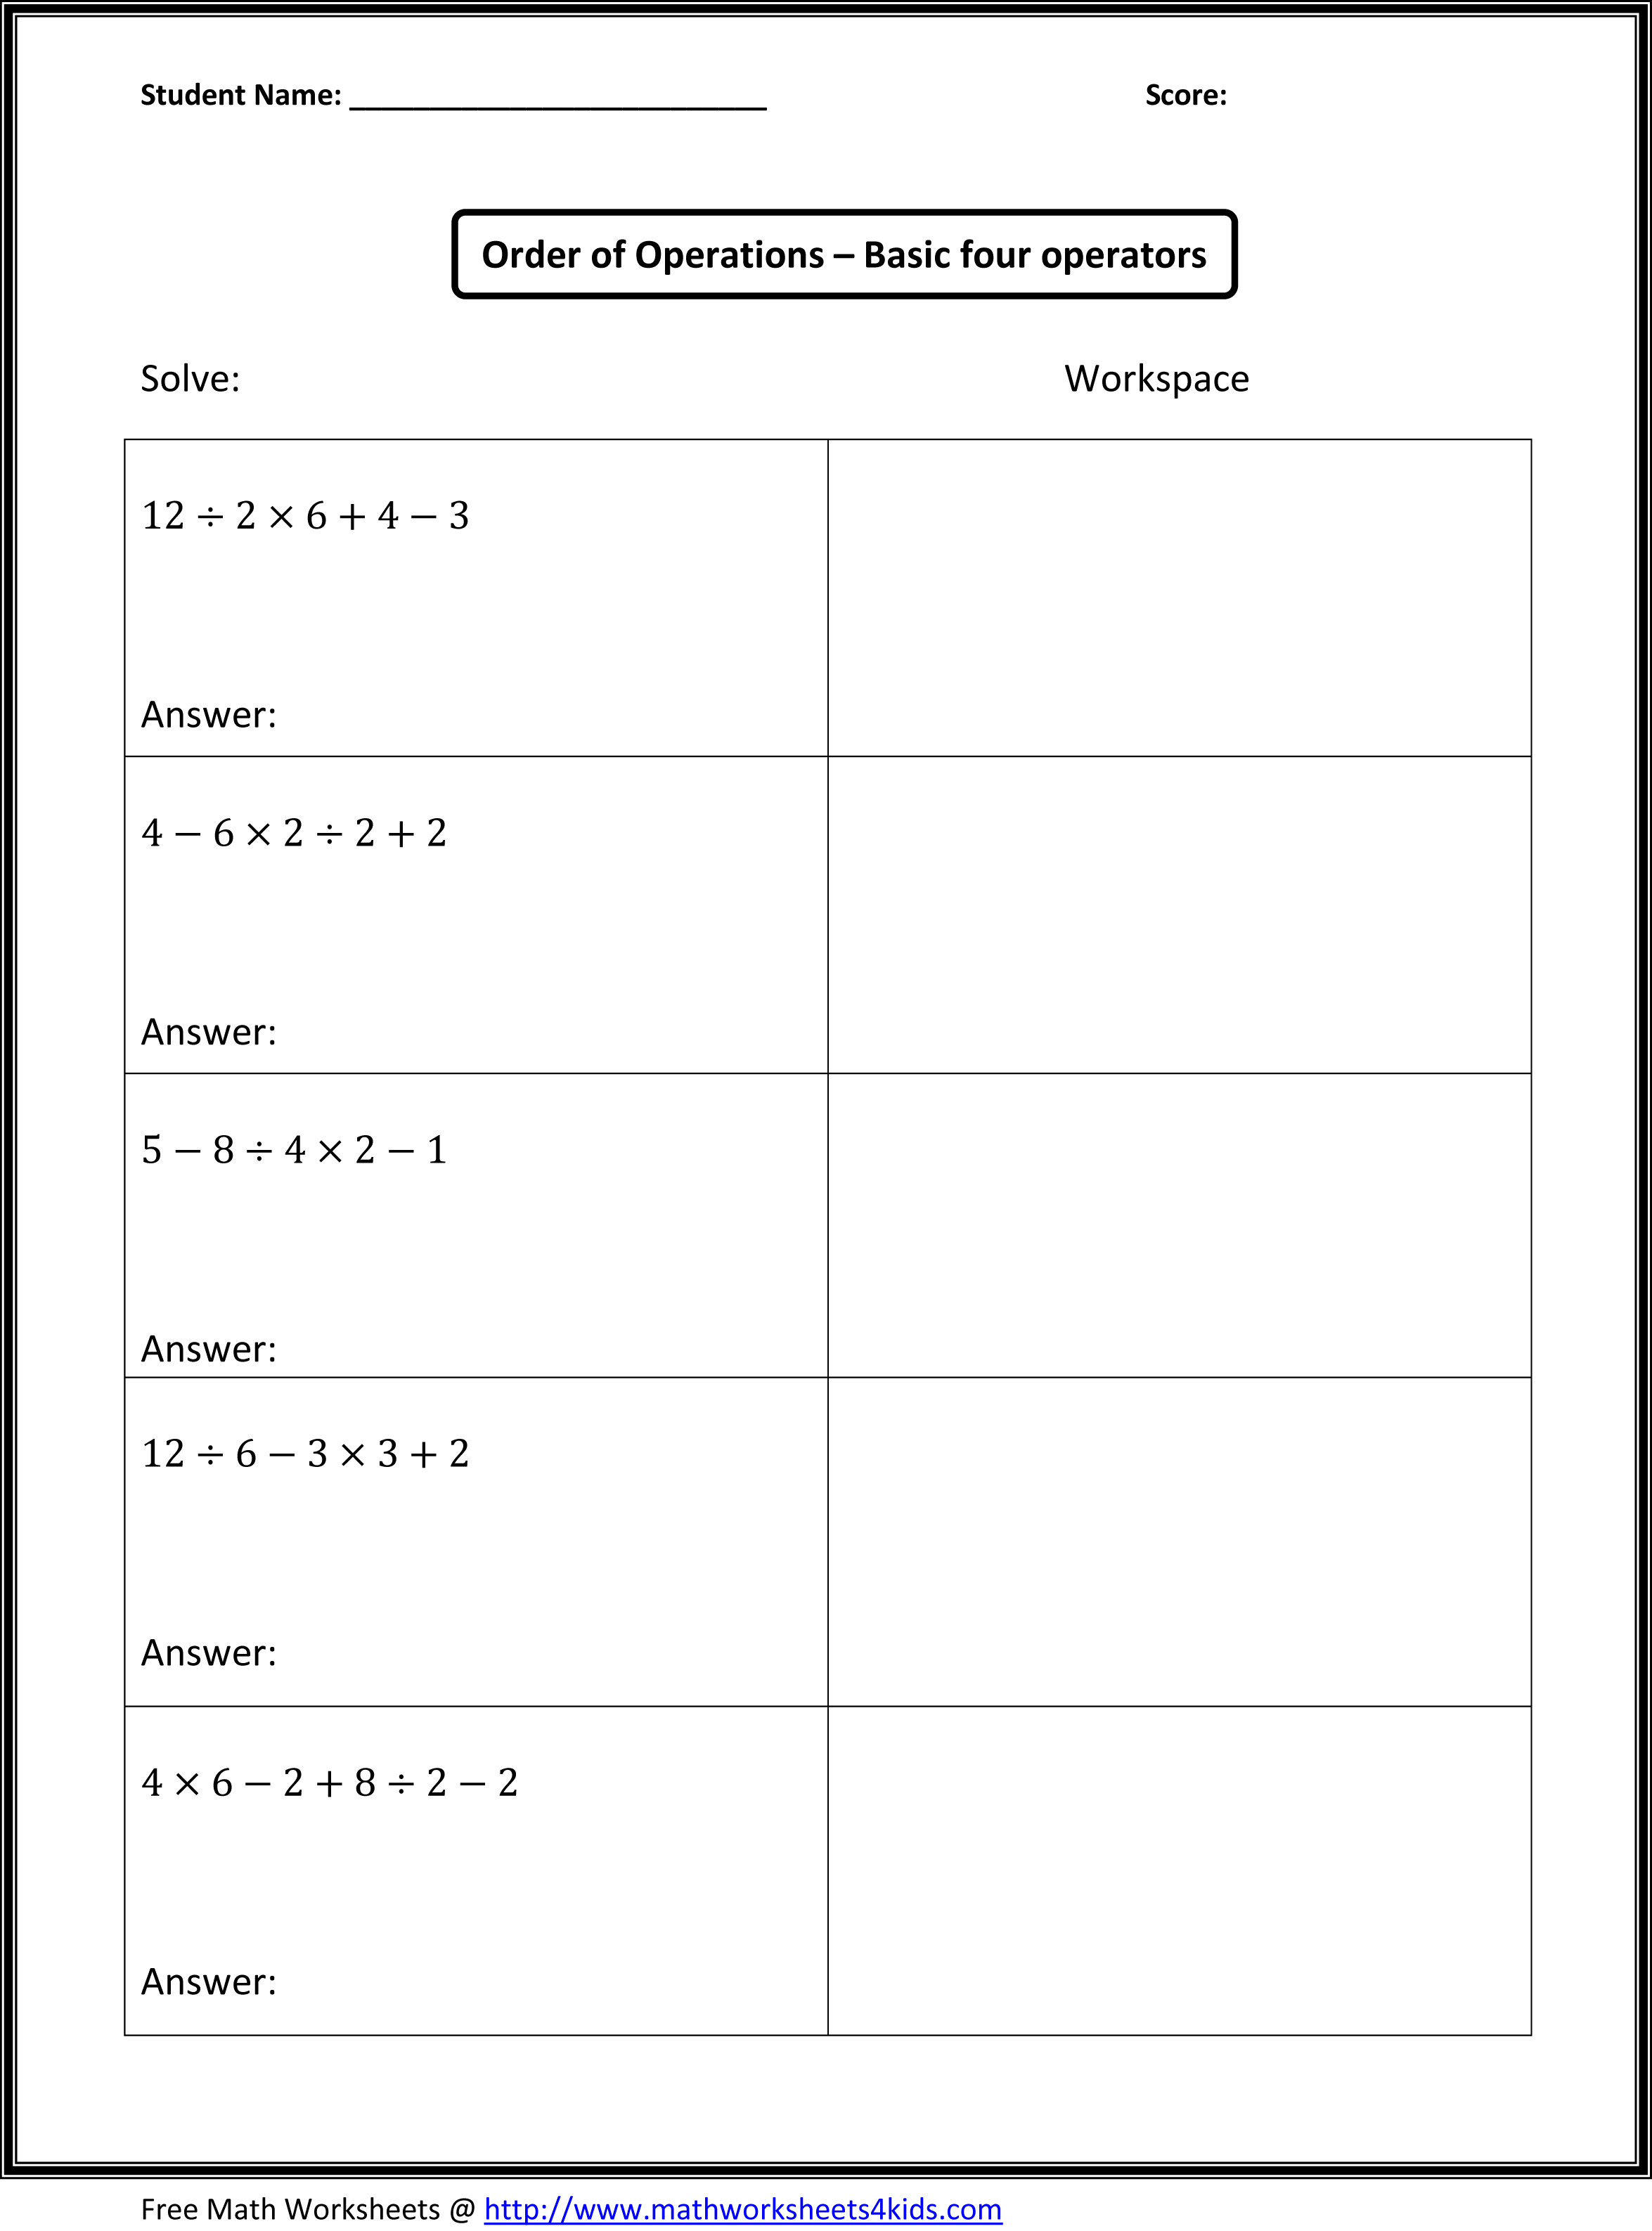 13-best-images-of-common-units-of-measurement-worksheets-5th-grade-math-word-problems